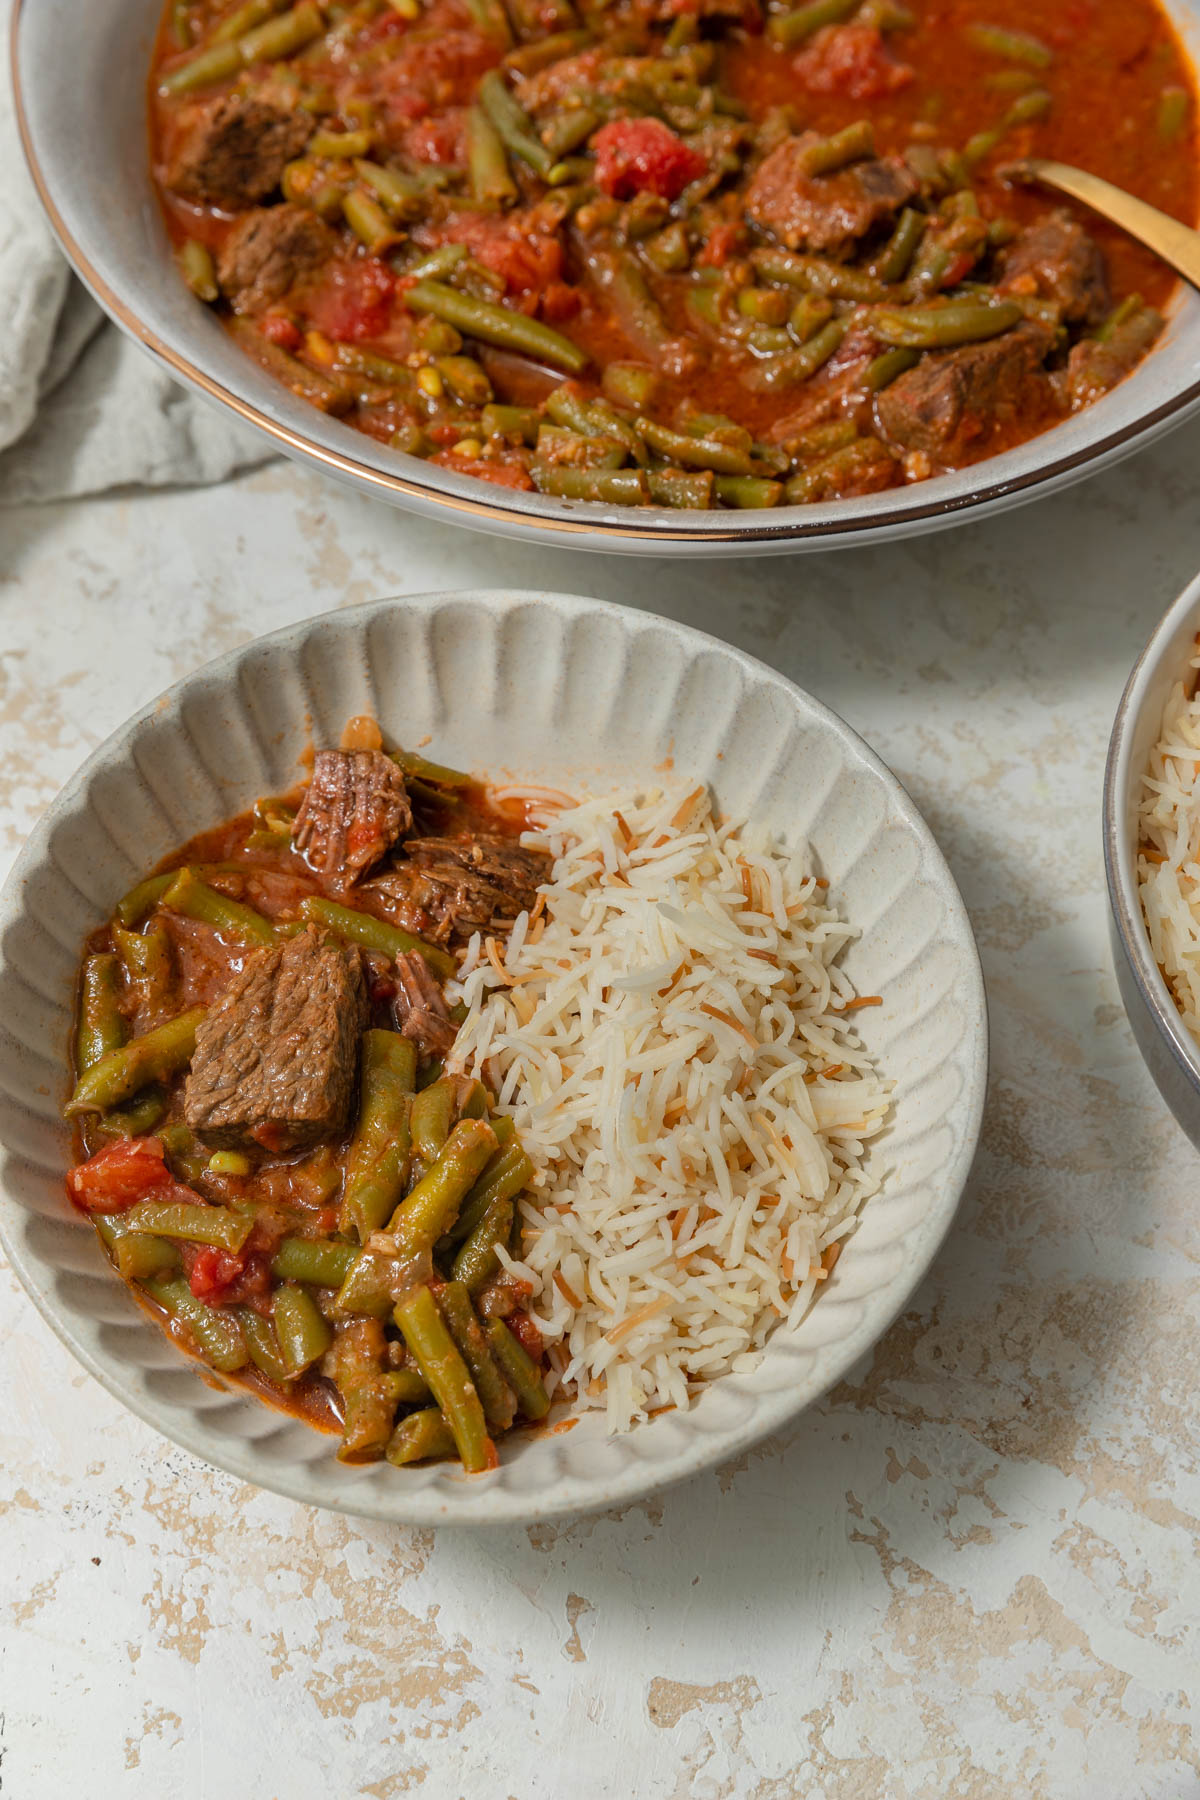 Lebanese green bean stew with vermicelli rice in a bowl.